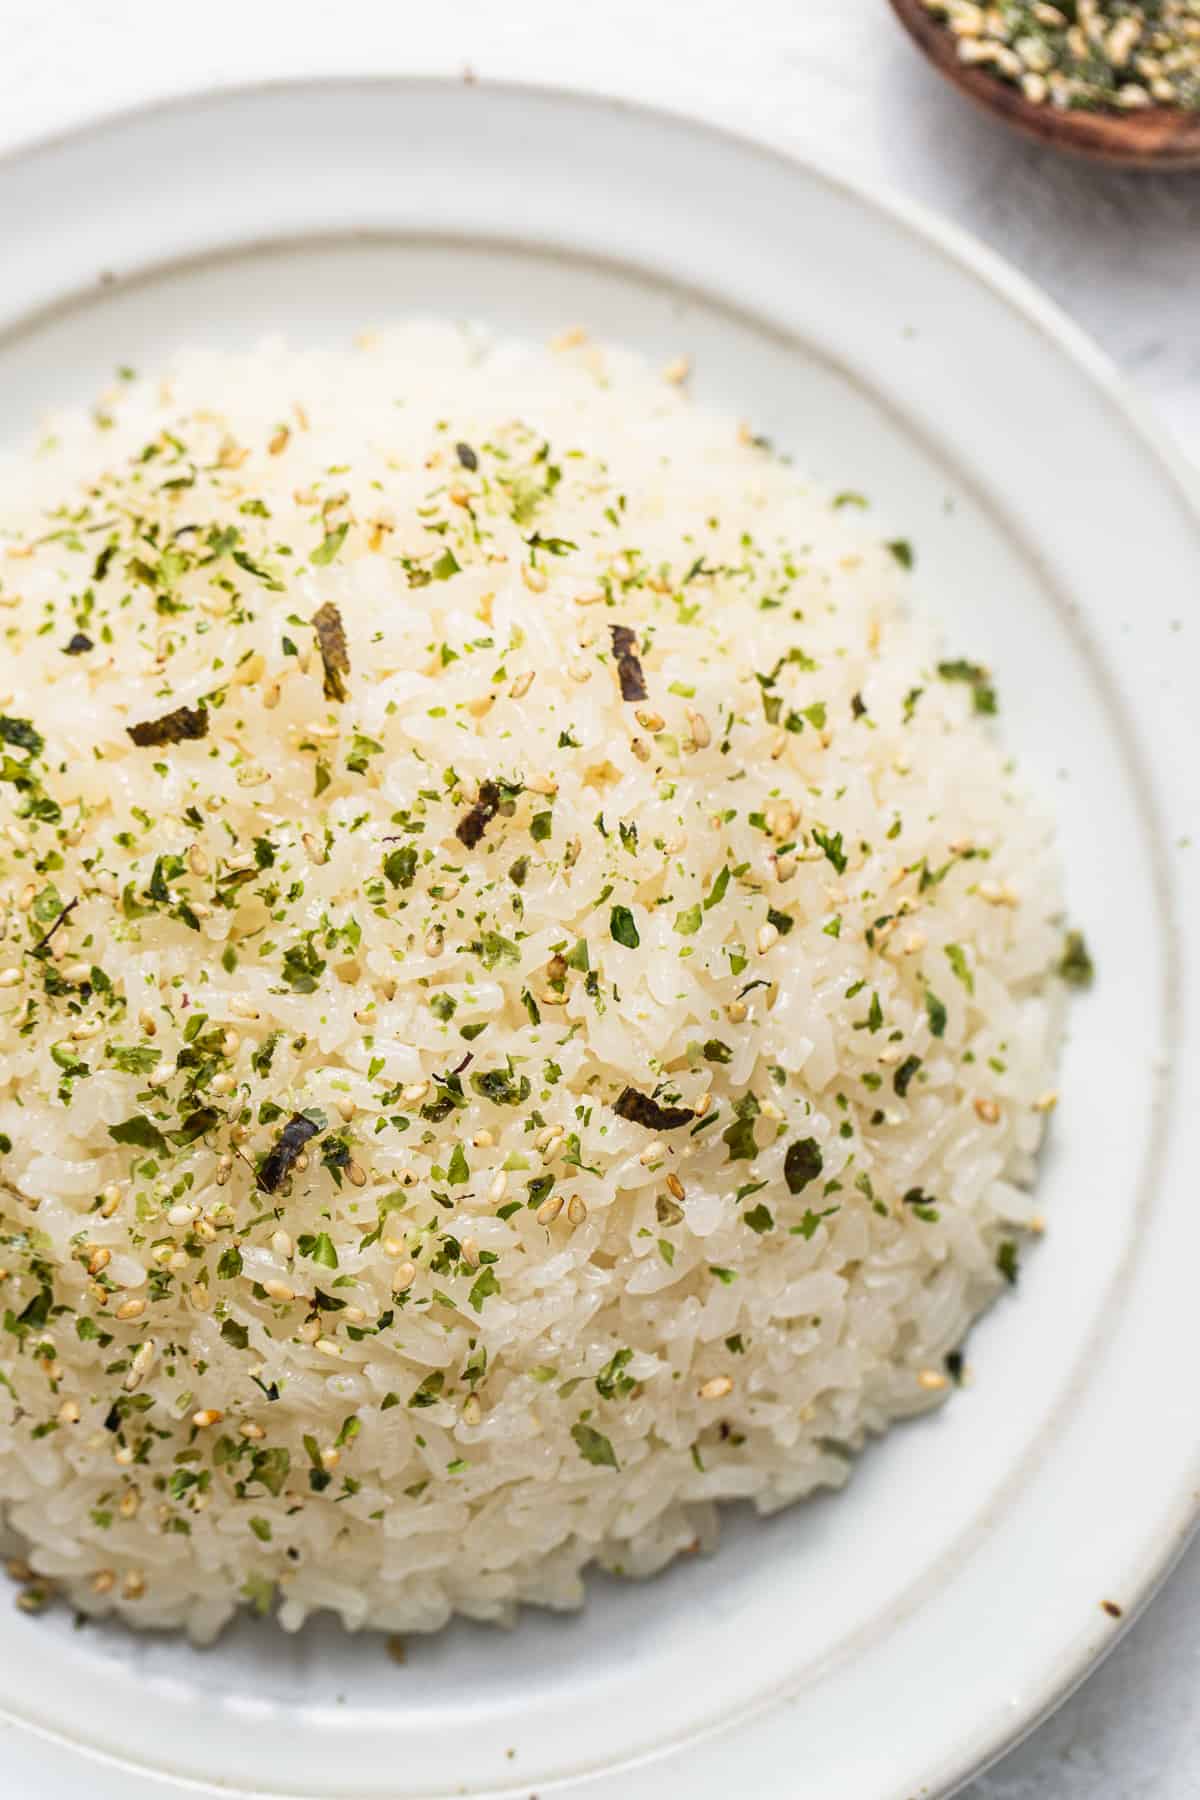 https://fitfoodiefinds.com/wp-content/uploads/2023/03/Instant-Pot-Sticky-Rice-2.jpg